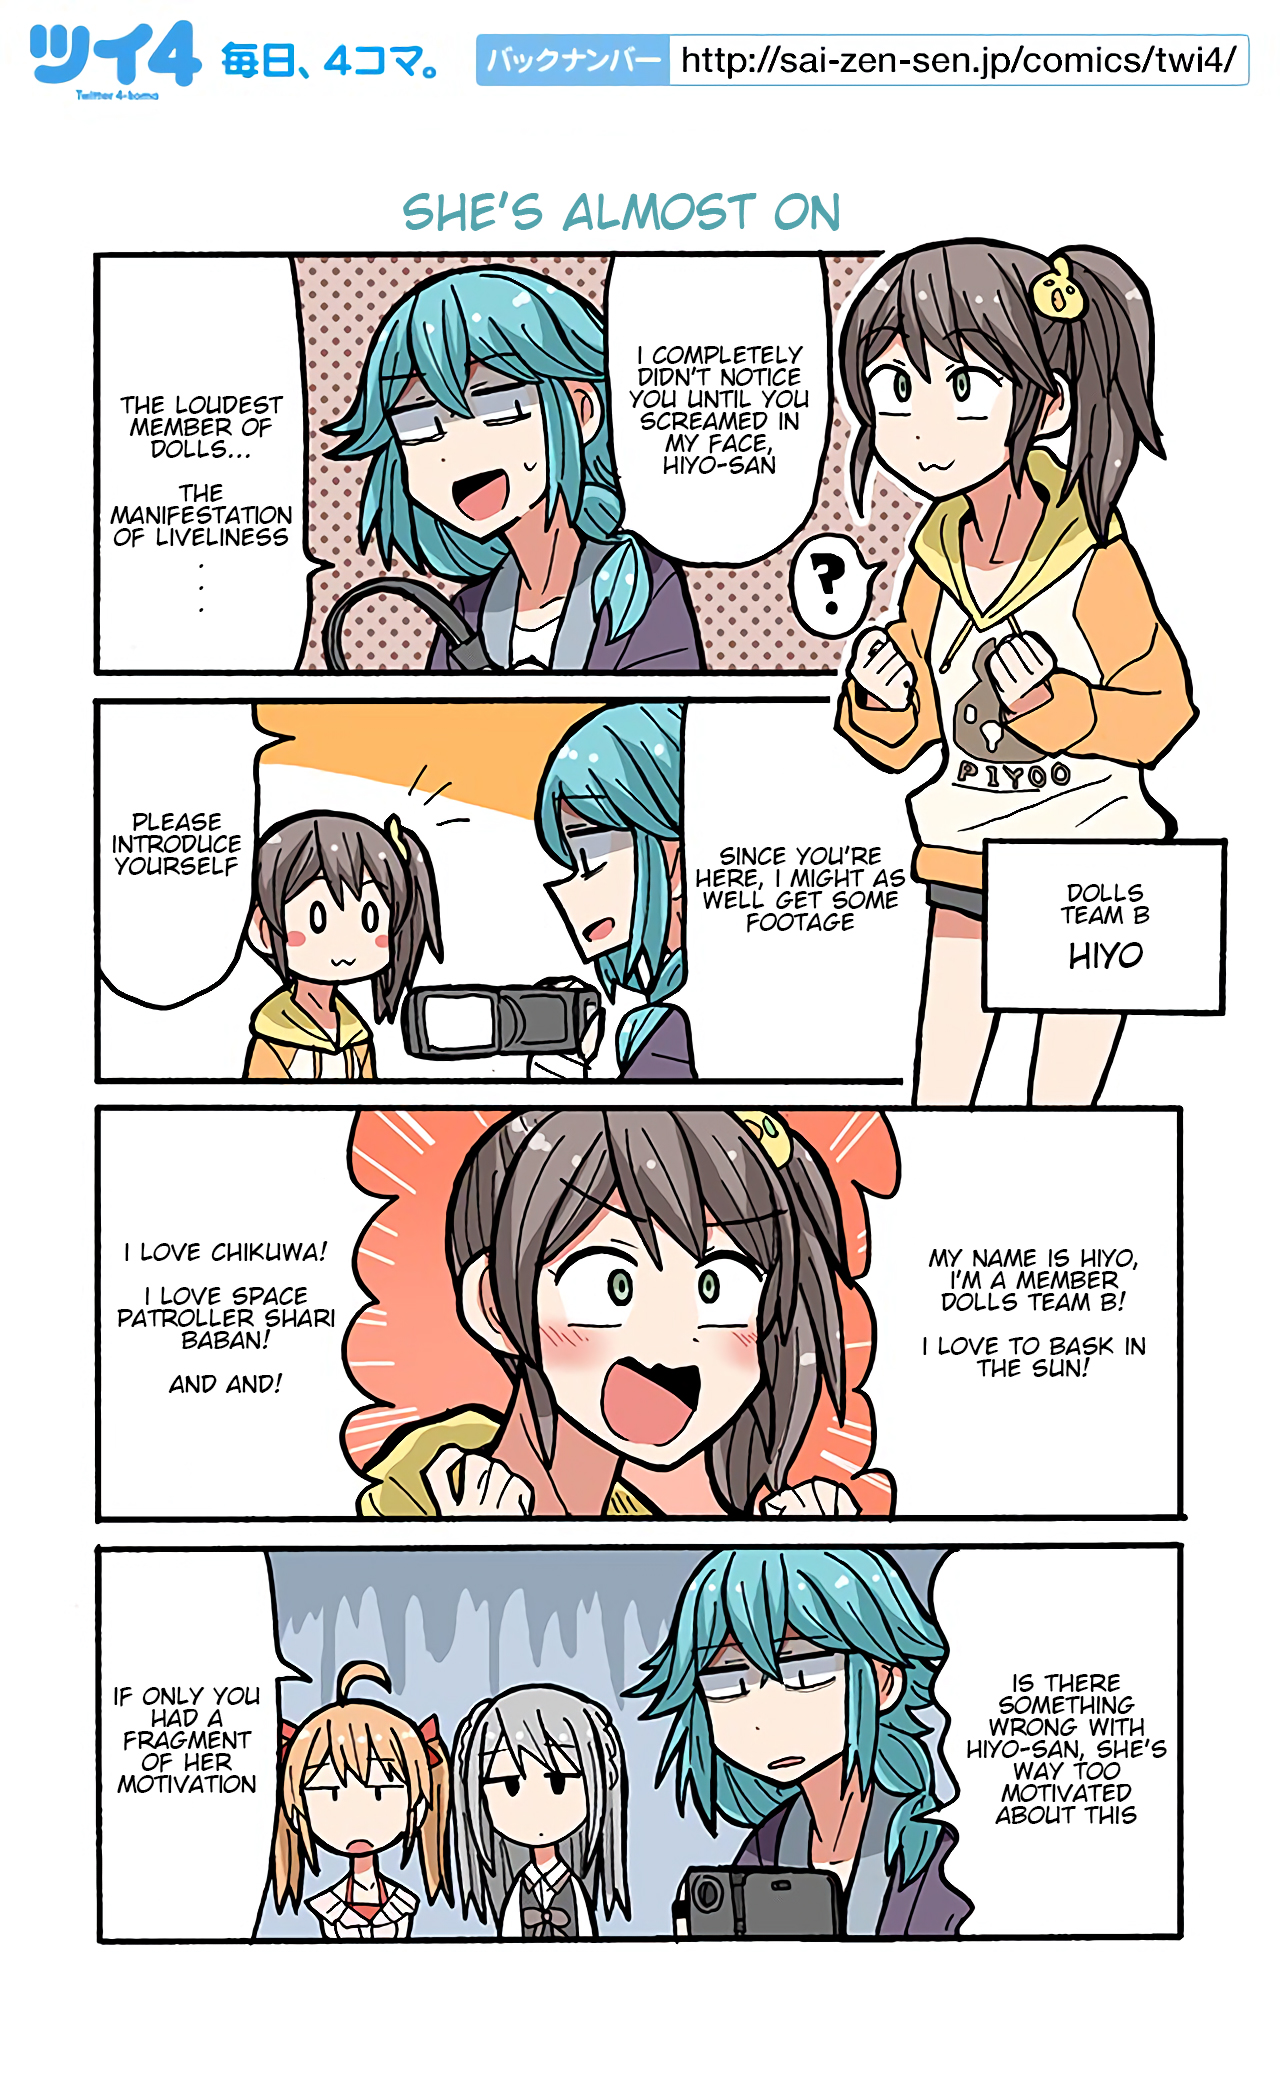 Lazy Idol Yamada's Life as a Youtuber Ch. 44 She's Almost On